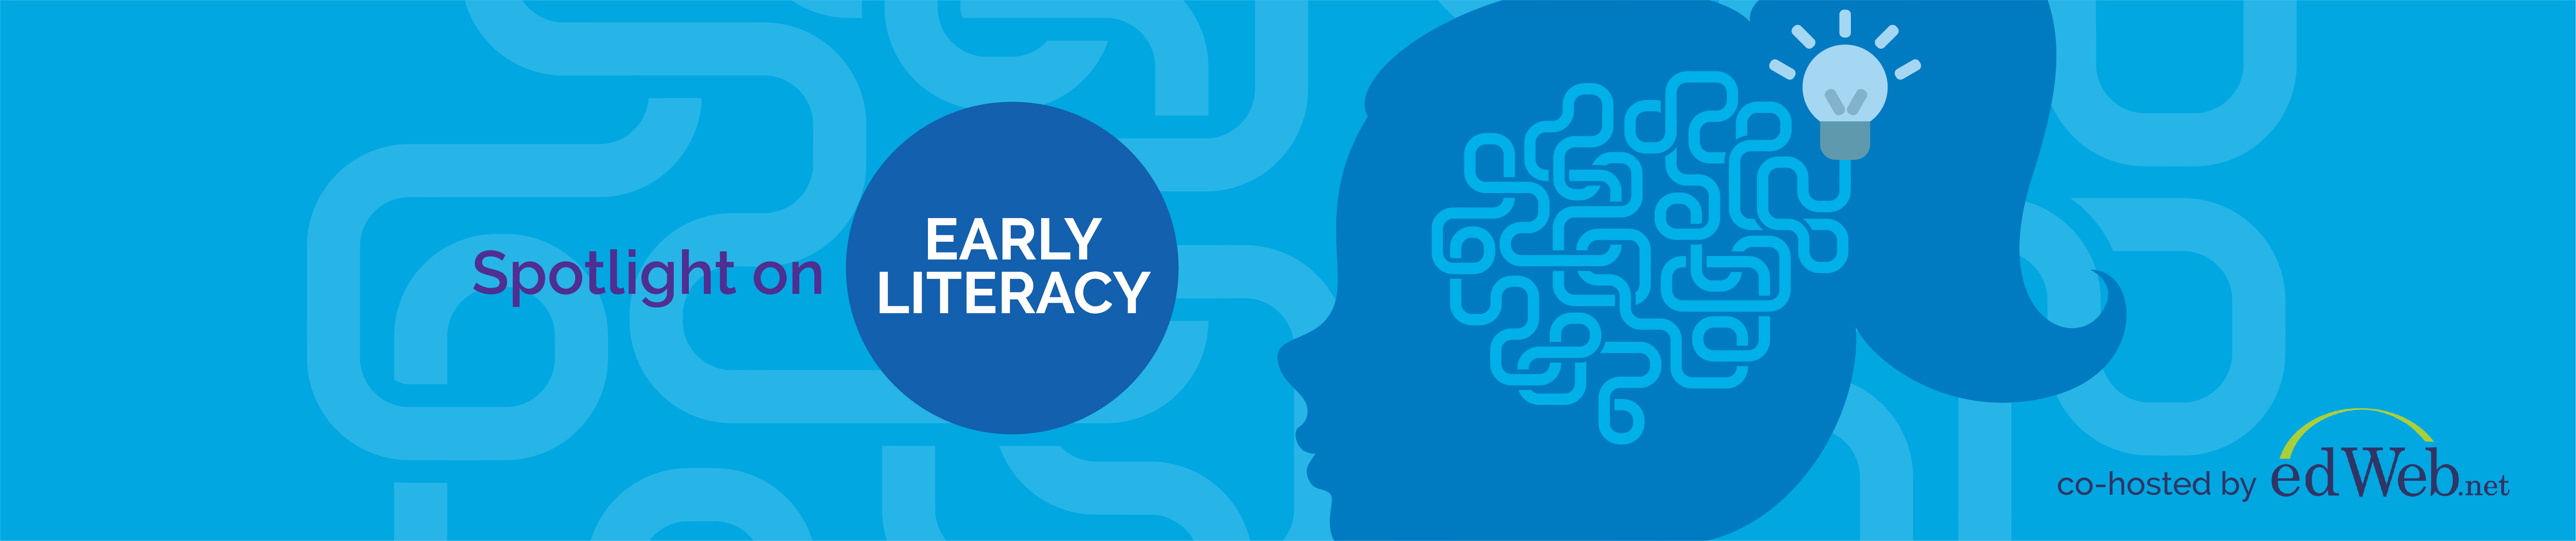 Spotlight on Early Literacy Virtual Conference